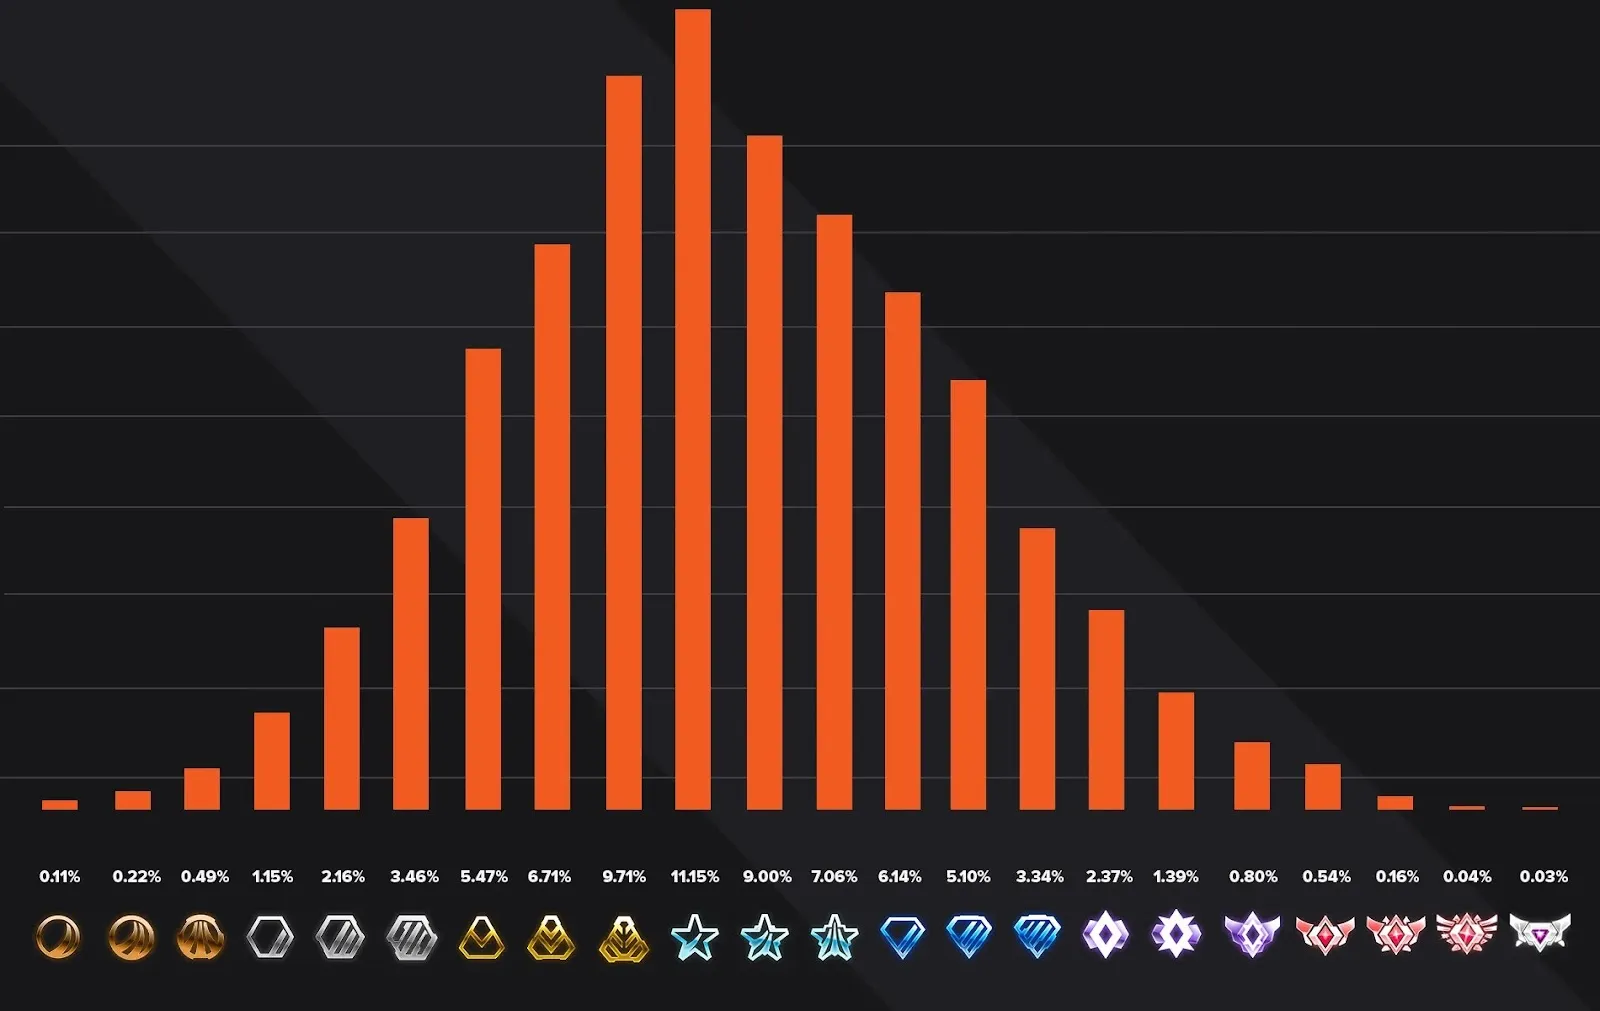 Here is the rank distribution for 2v2 in Rocket League. | Image Credit: The Global Gaming